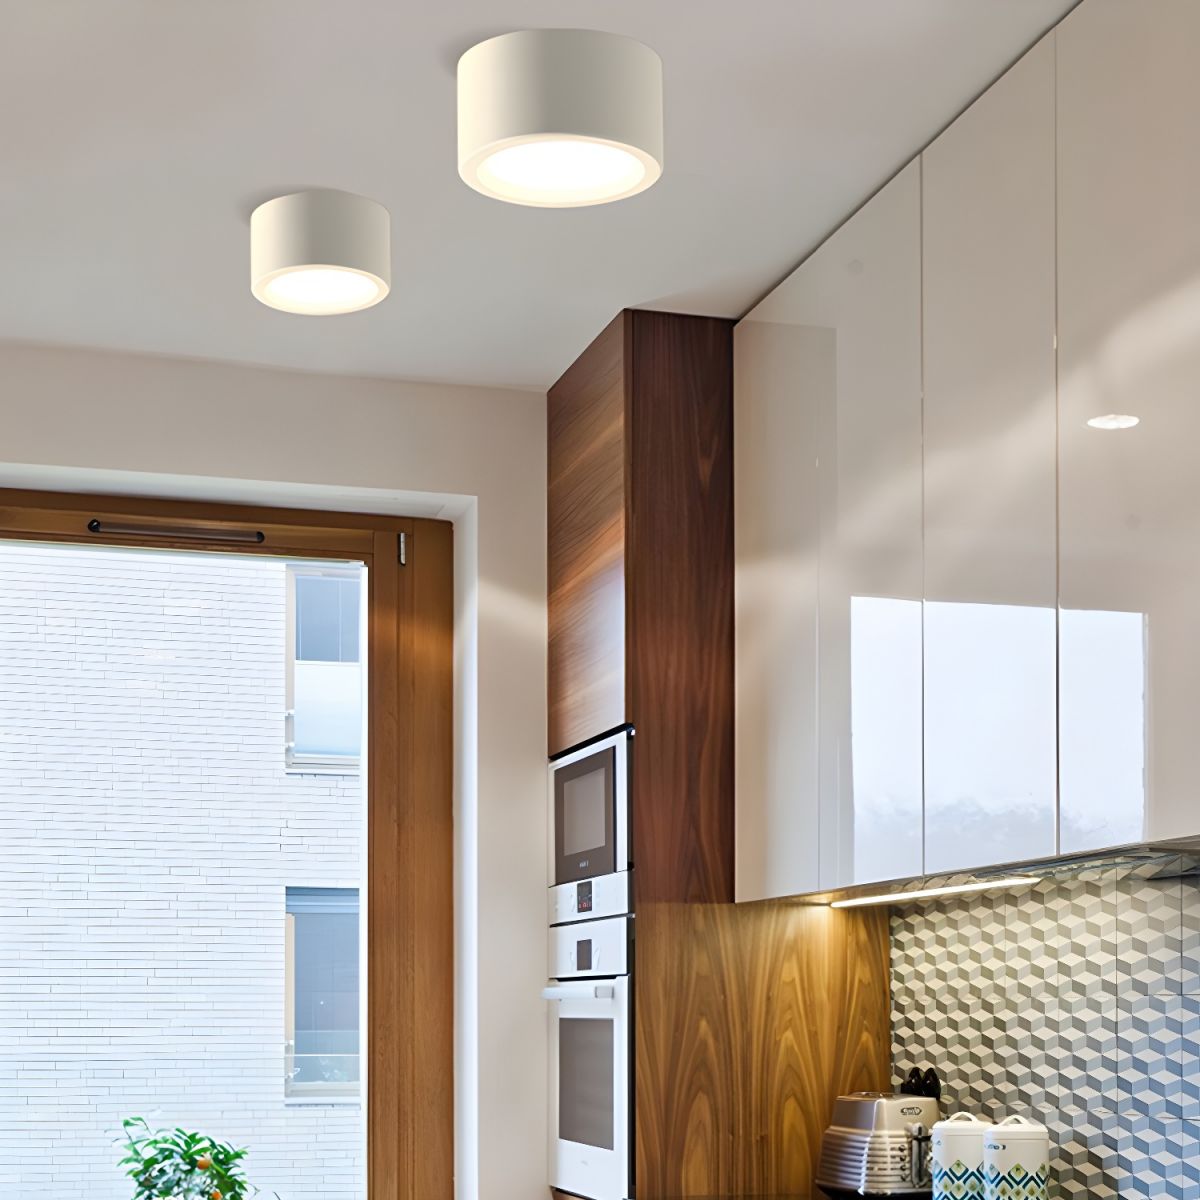 Nordic Style Indoor Surface Flush Ceiling Lights